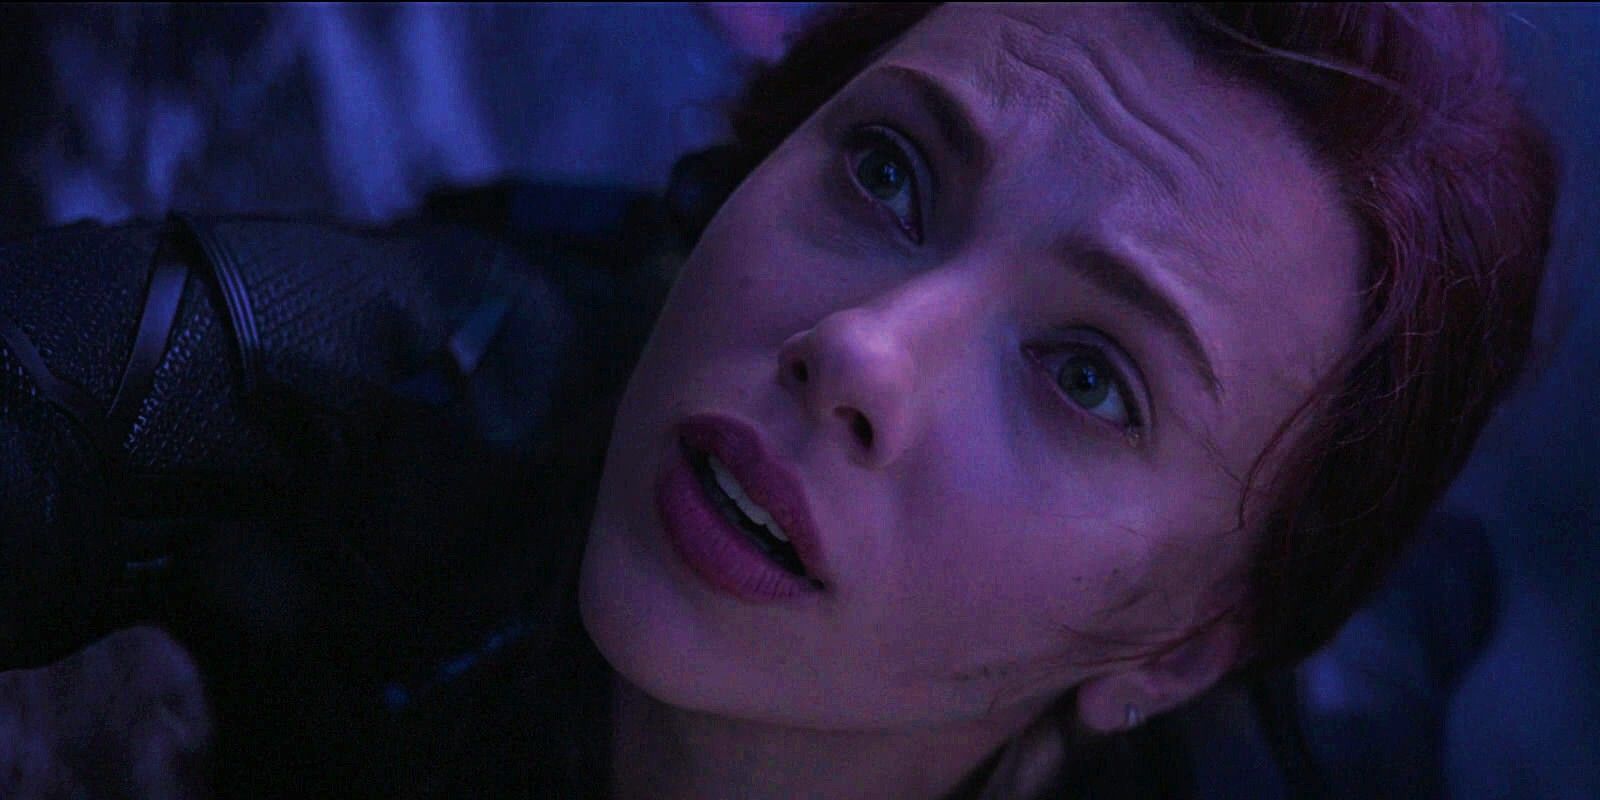 Natasha looks up as she hangs from the cliff on Vormir in Avengers: Endgame